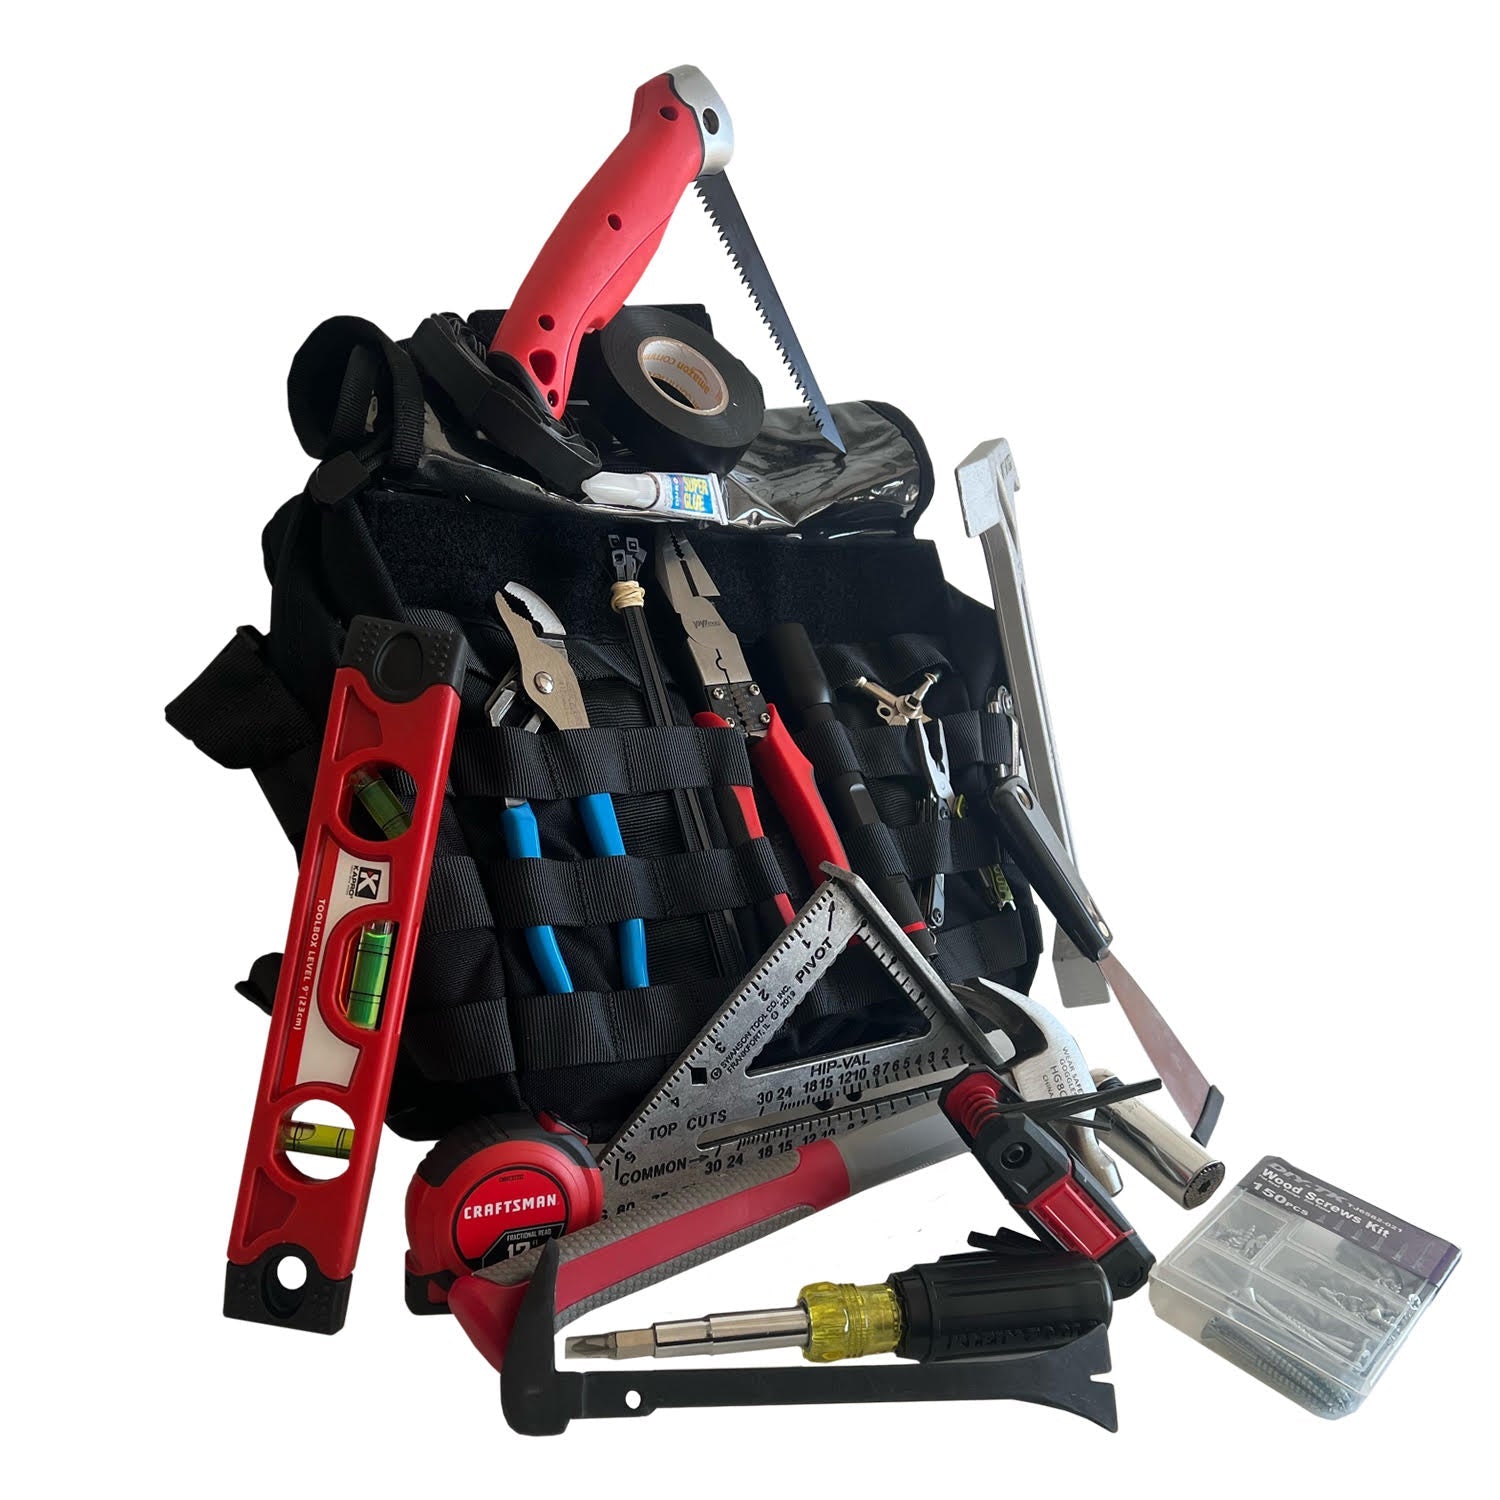 The Echo-Sigma Handy Bag emergency tool kit with gear out